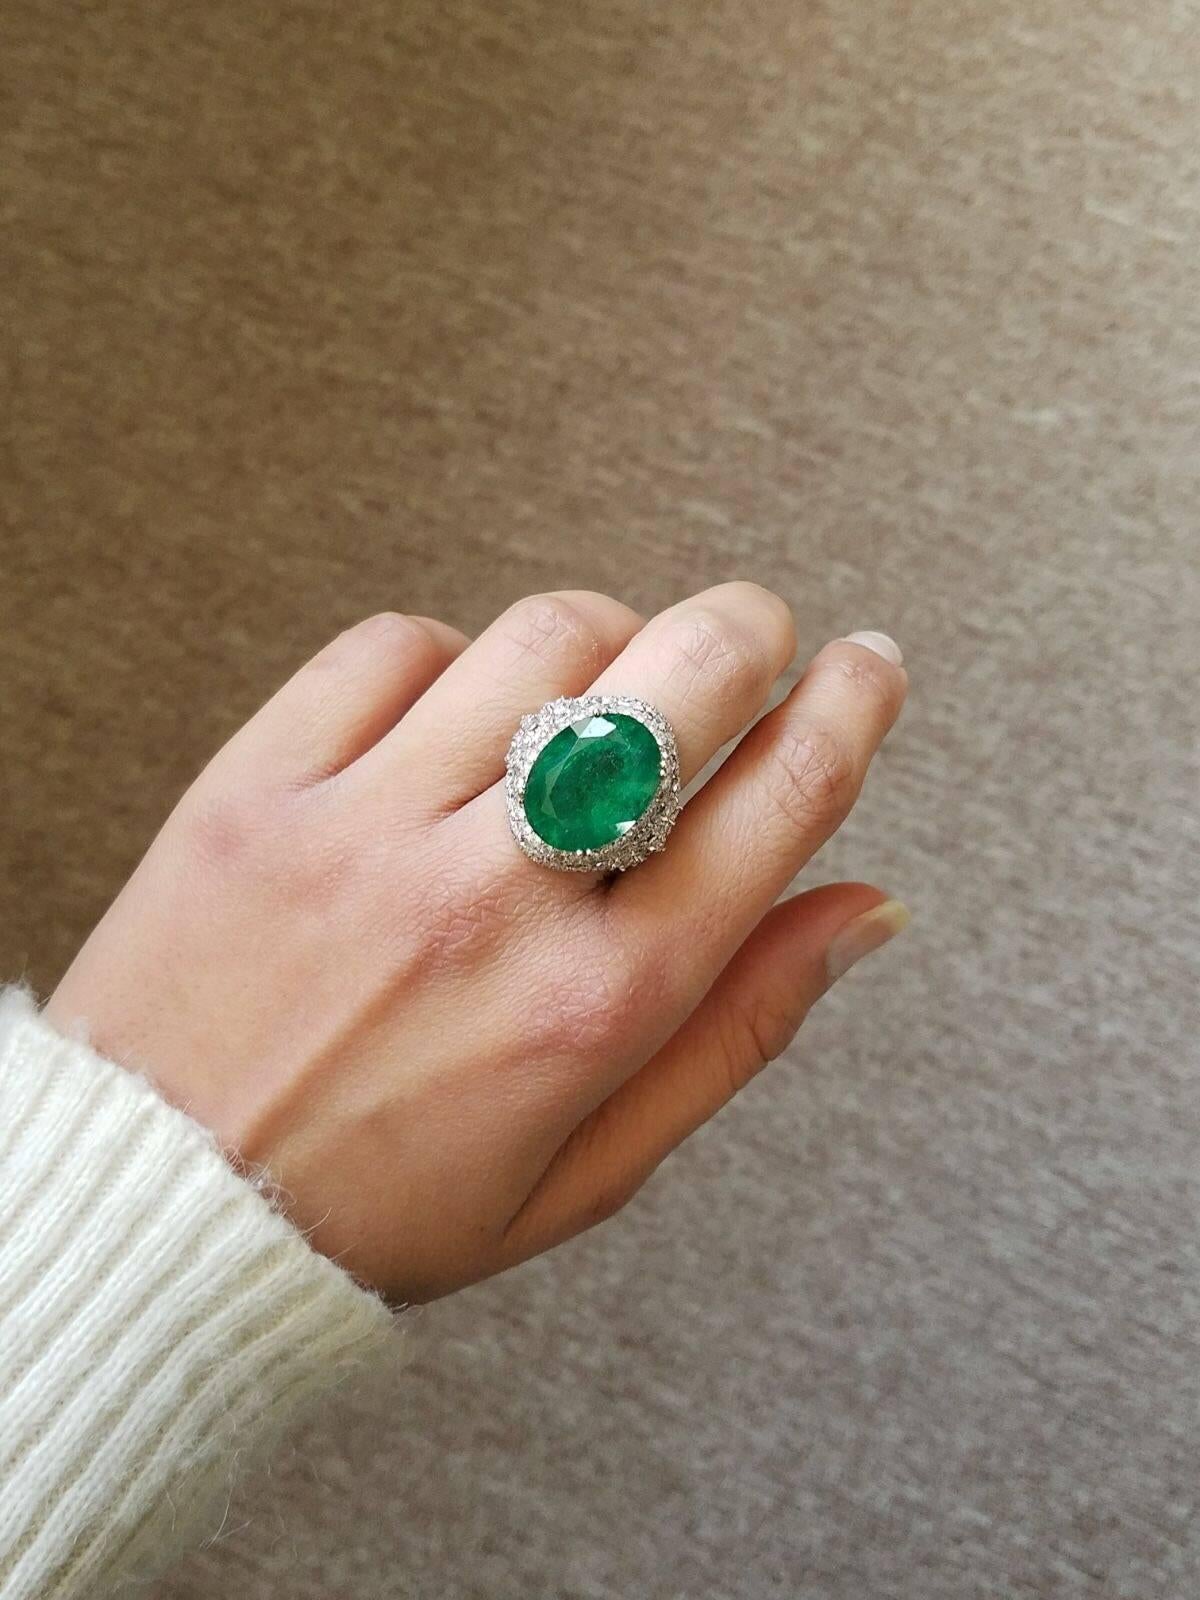 Oval Cut 15.79 carat Oval Shape Emerald and Diamond Cocktail Ring